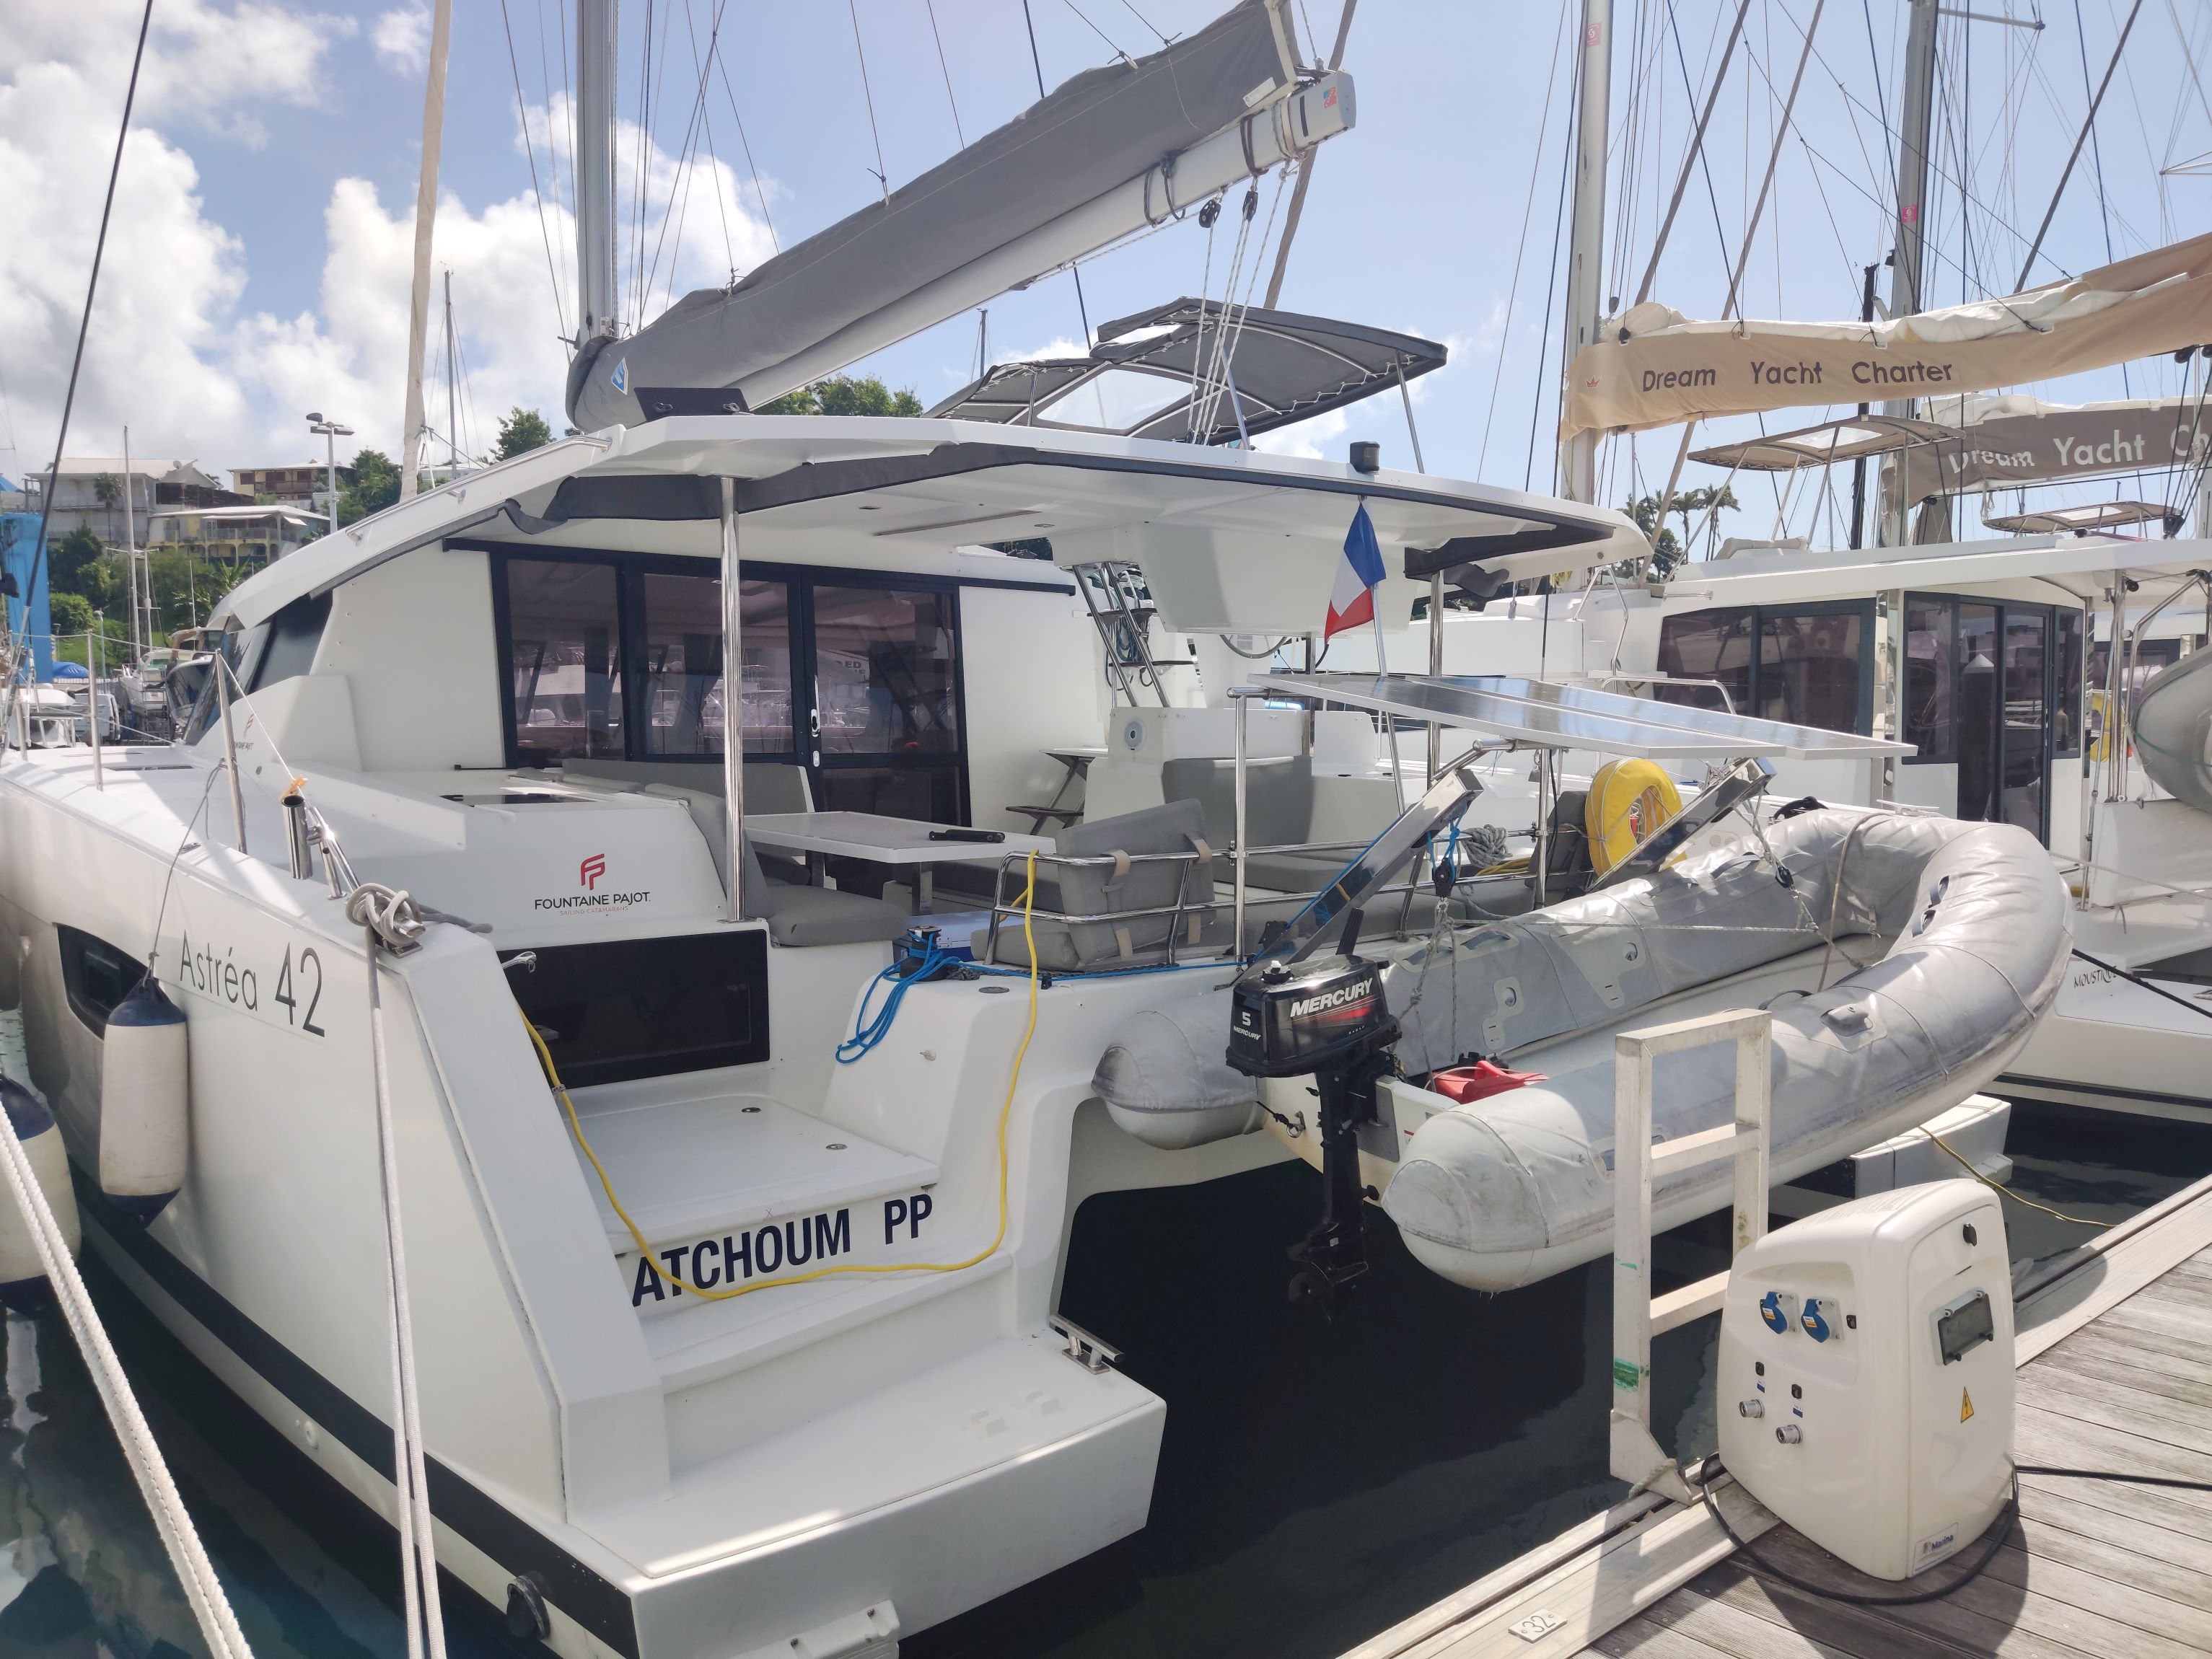 Atchoum Bareboat Charter in Guadeloupe